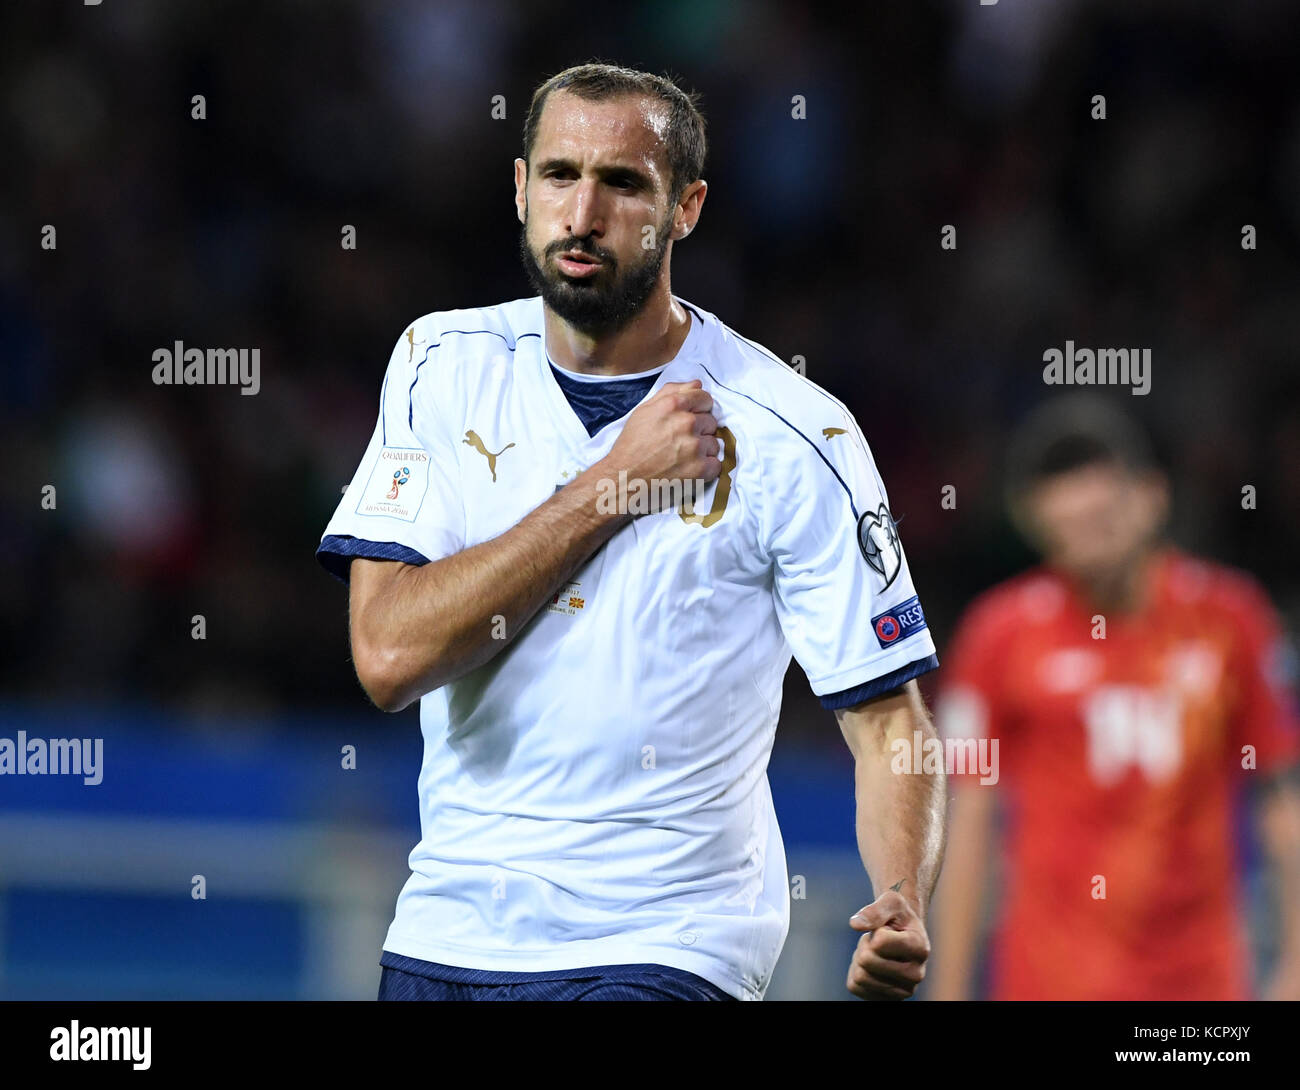 Turin, Italy. 6th Oct, 2017. Giorgio Chiellini of Italy celebrates scoring during the FIFA 2018 World Cup Qualifier match between Italy and Macedonia in Turin, Italy, on Oct. 6, 2017. The game ended with a 1-1 draw. Credit: Alberto Lingria/Xinhua/Alamy Live News Stock Photo